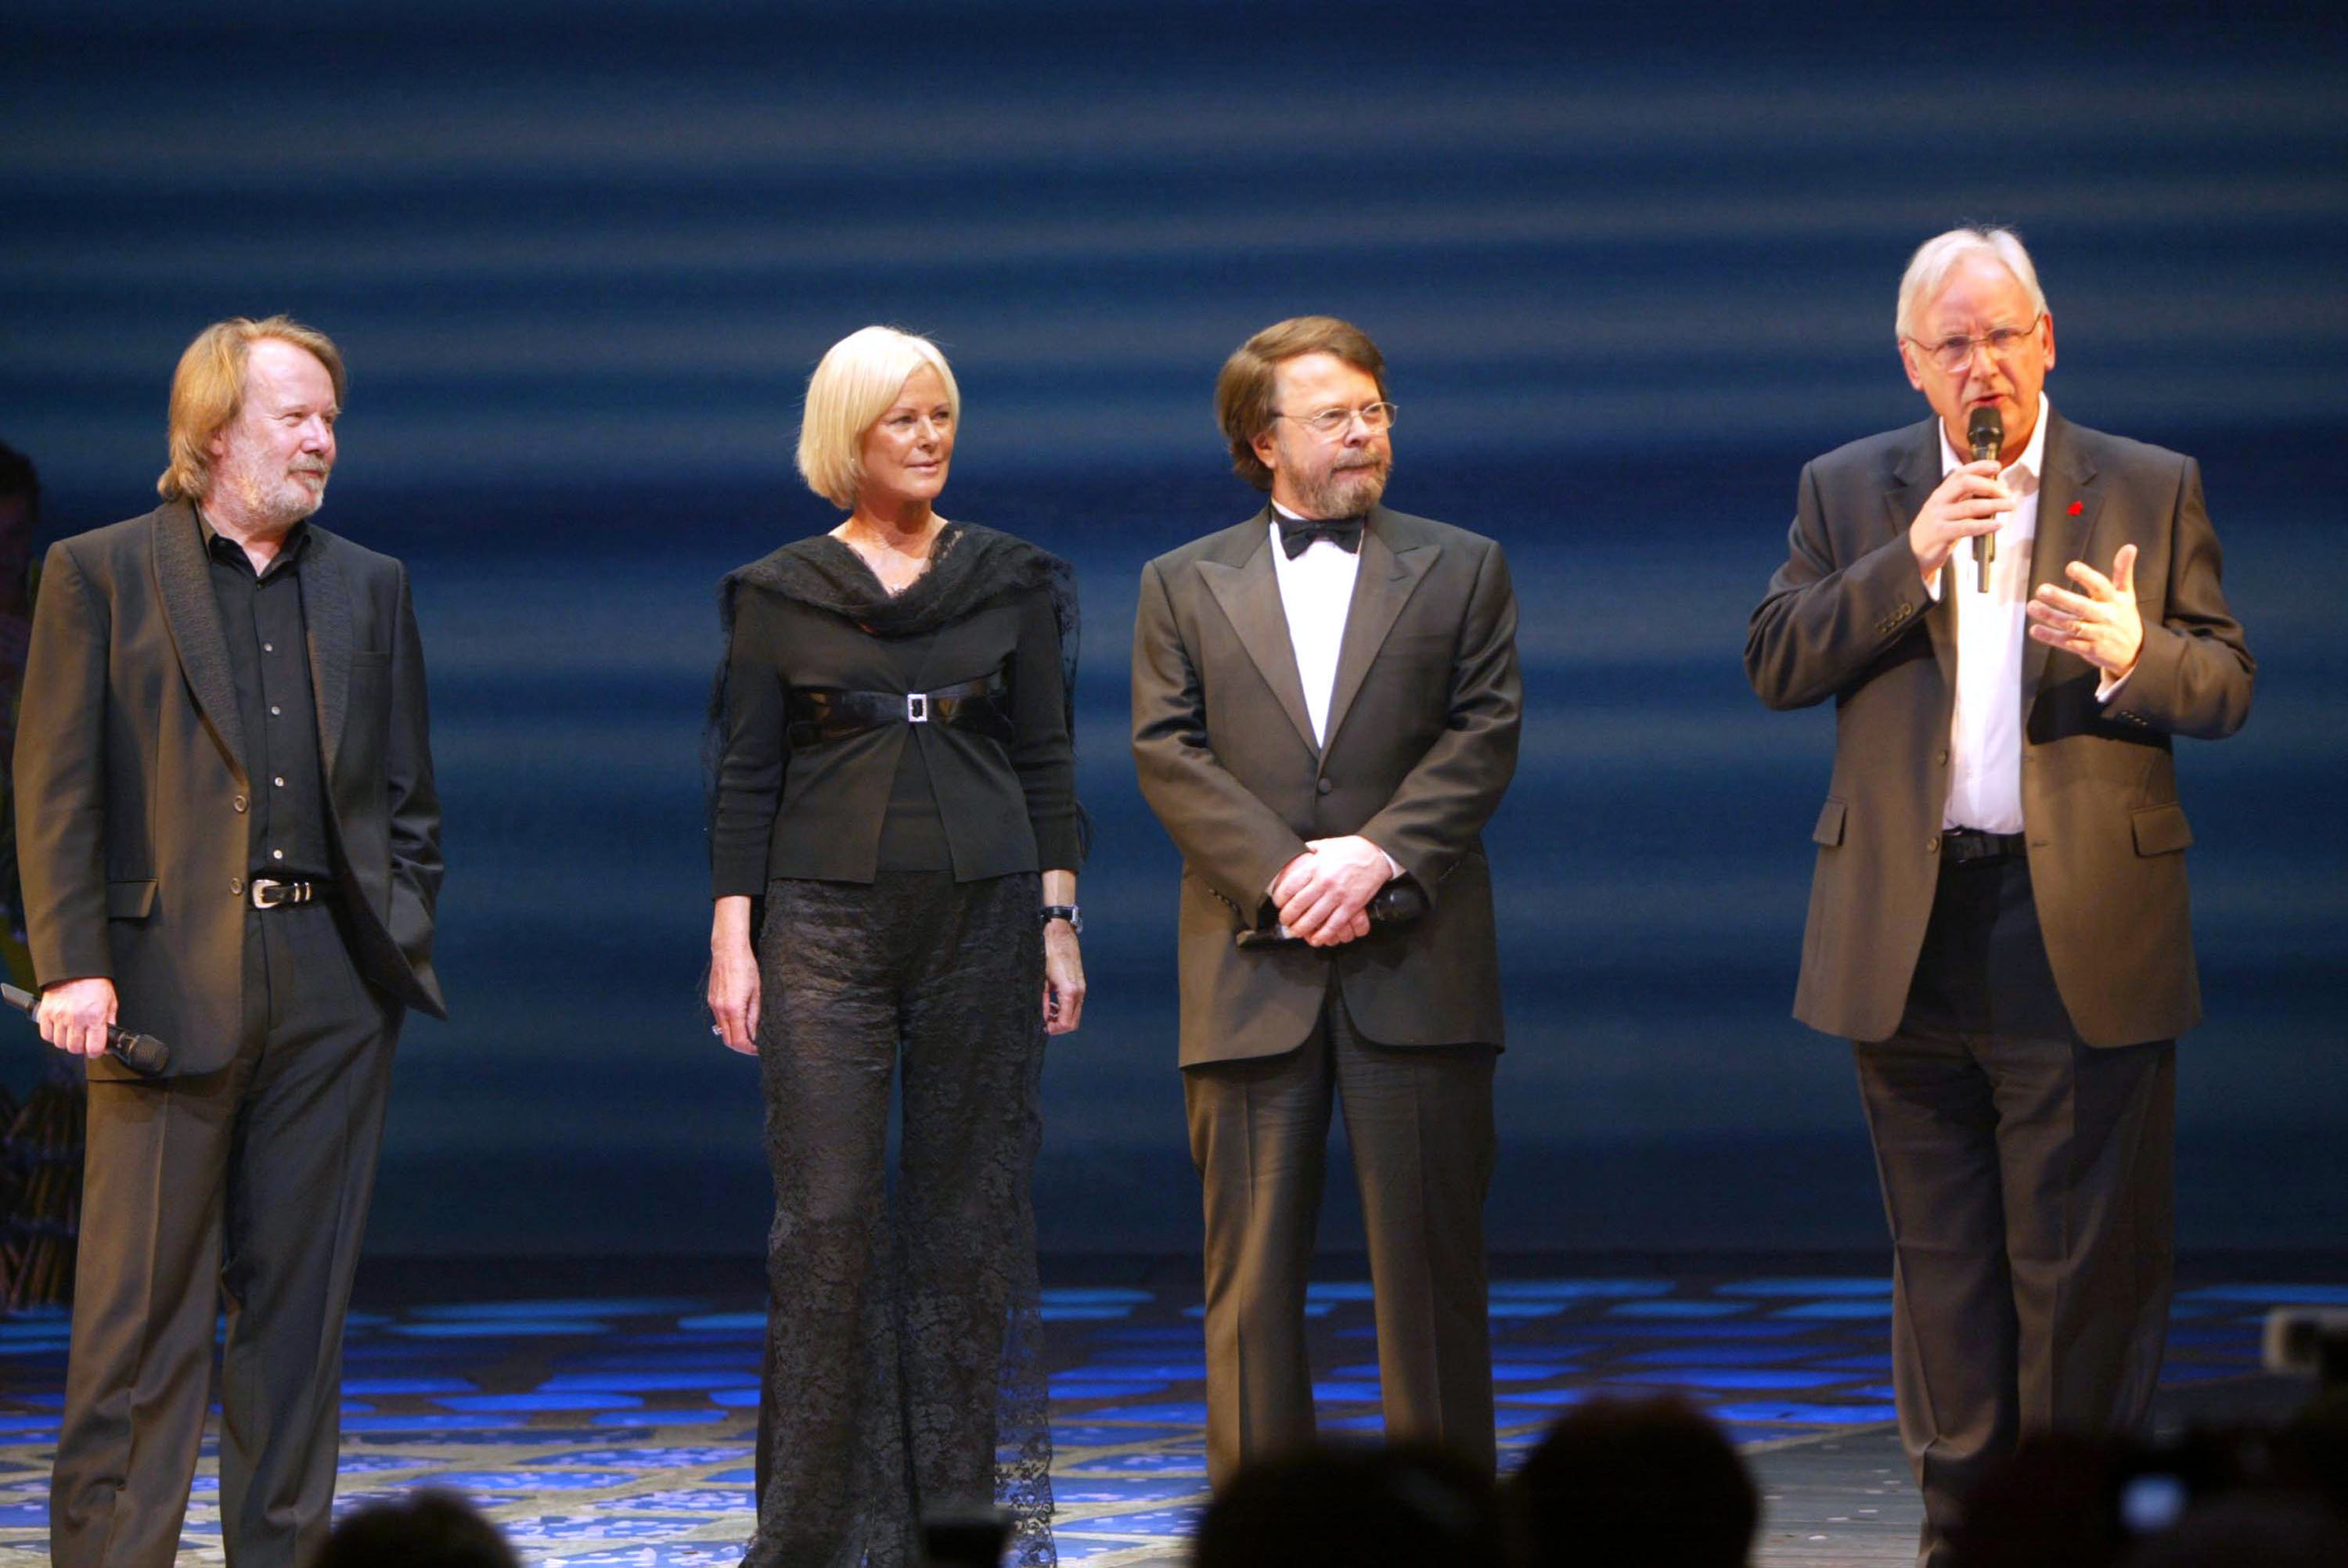 Benny Andersson, Frida Lyngstad, and Bjorn Ulvaeus from ABBA join Pete Waterman on stage at the fifth-anniversary performance of "Mamma Mia!," a musical based on ABBA's hits at the Prince Edward Theatre in London, England, on April 6, 2004. | Source: Getty Images